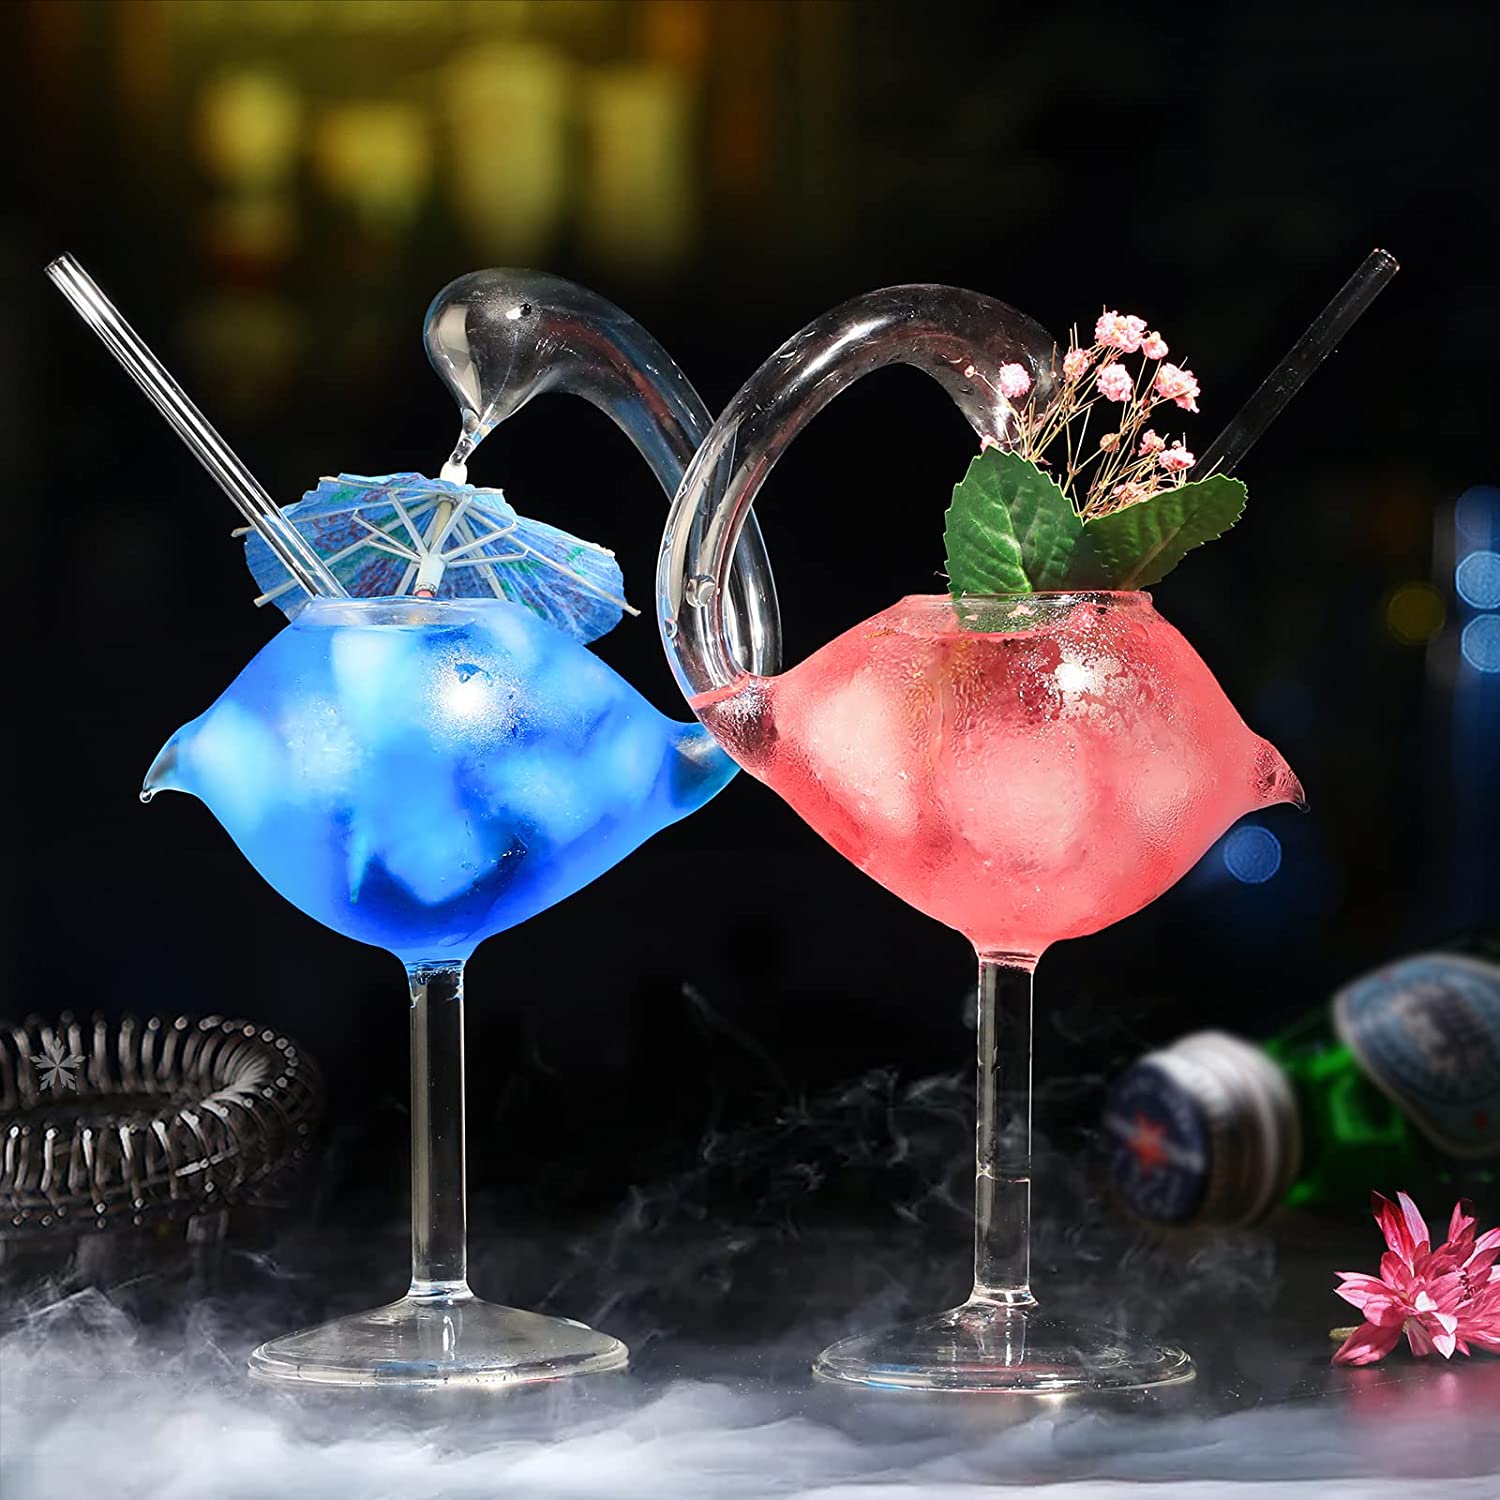 Two swan shaped cocktail glasses. One has a blue drink with a cocktail umbrella in it and the other has a red drink in it with a floral garnish.